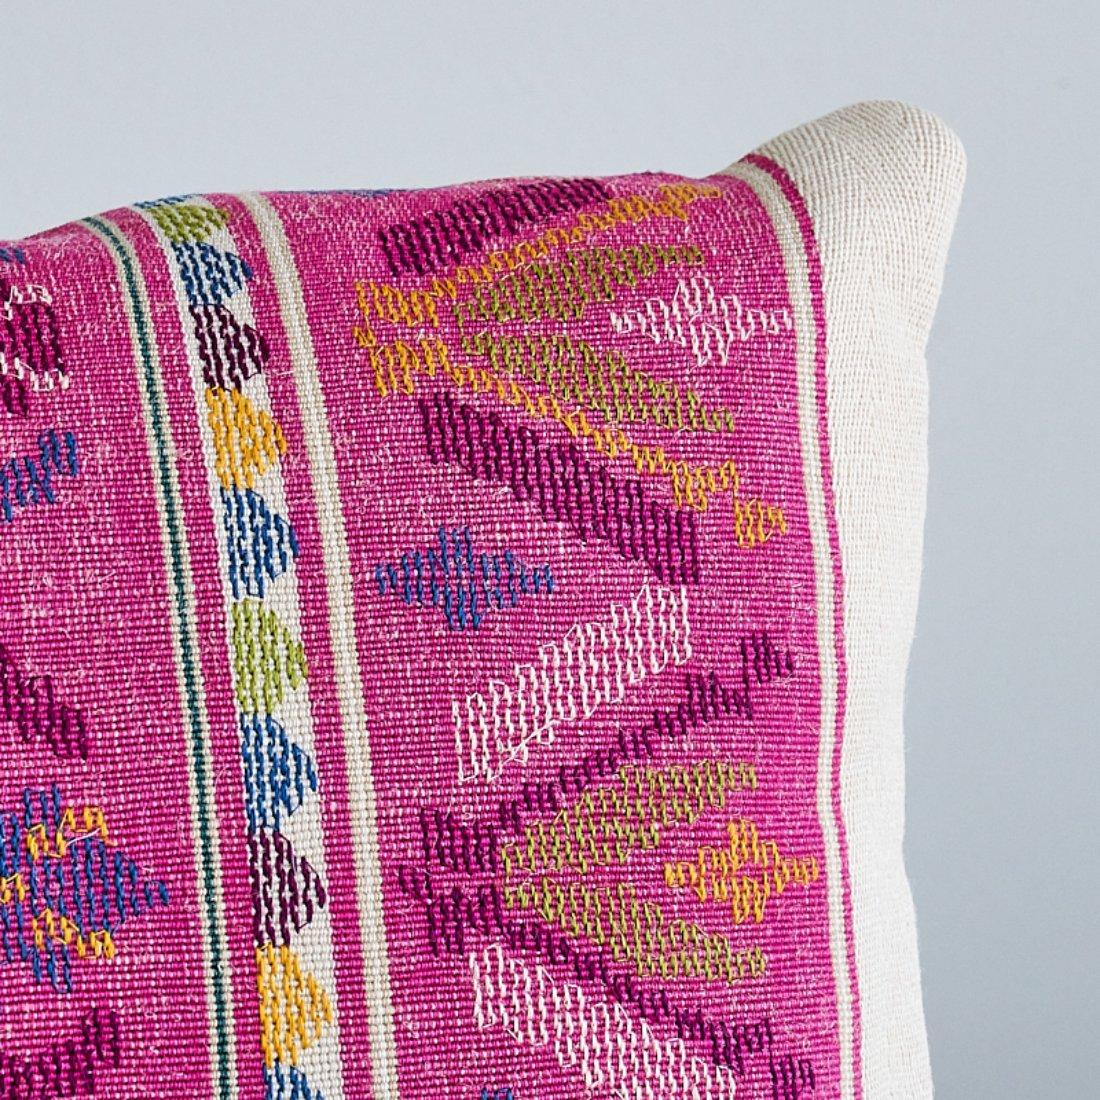 This pillow features Sandor Stripe with a knife edge finish. With a uniquely rustic, old-world quality, this wide-striped textile is handwoven with a jute weft and cotton warp and then embroidered with an open stitching for a rich, tactile feel.